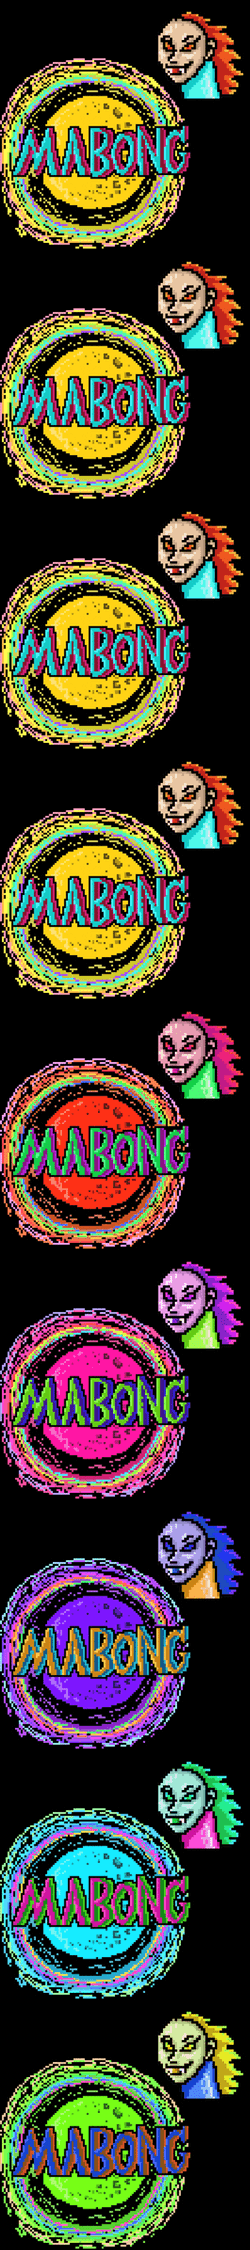 MABONG The Horse Ghost collection image